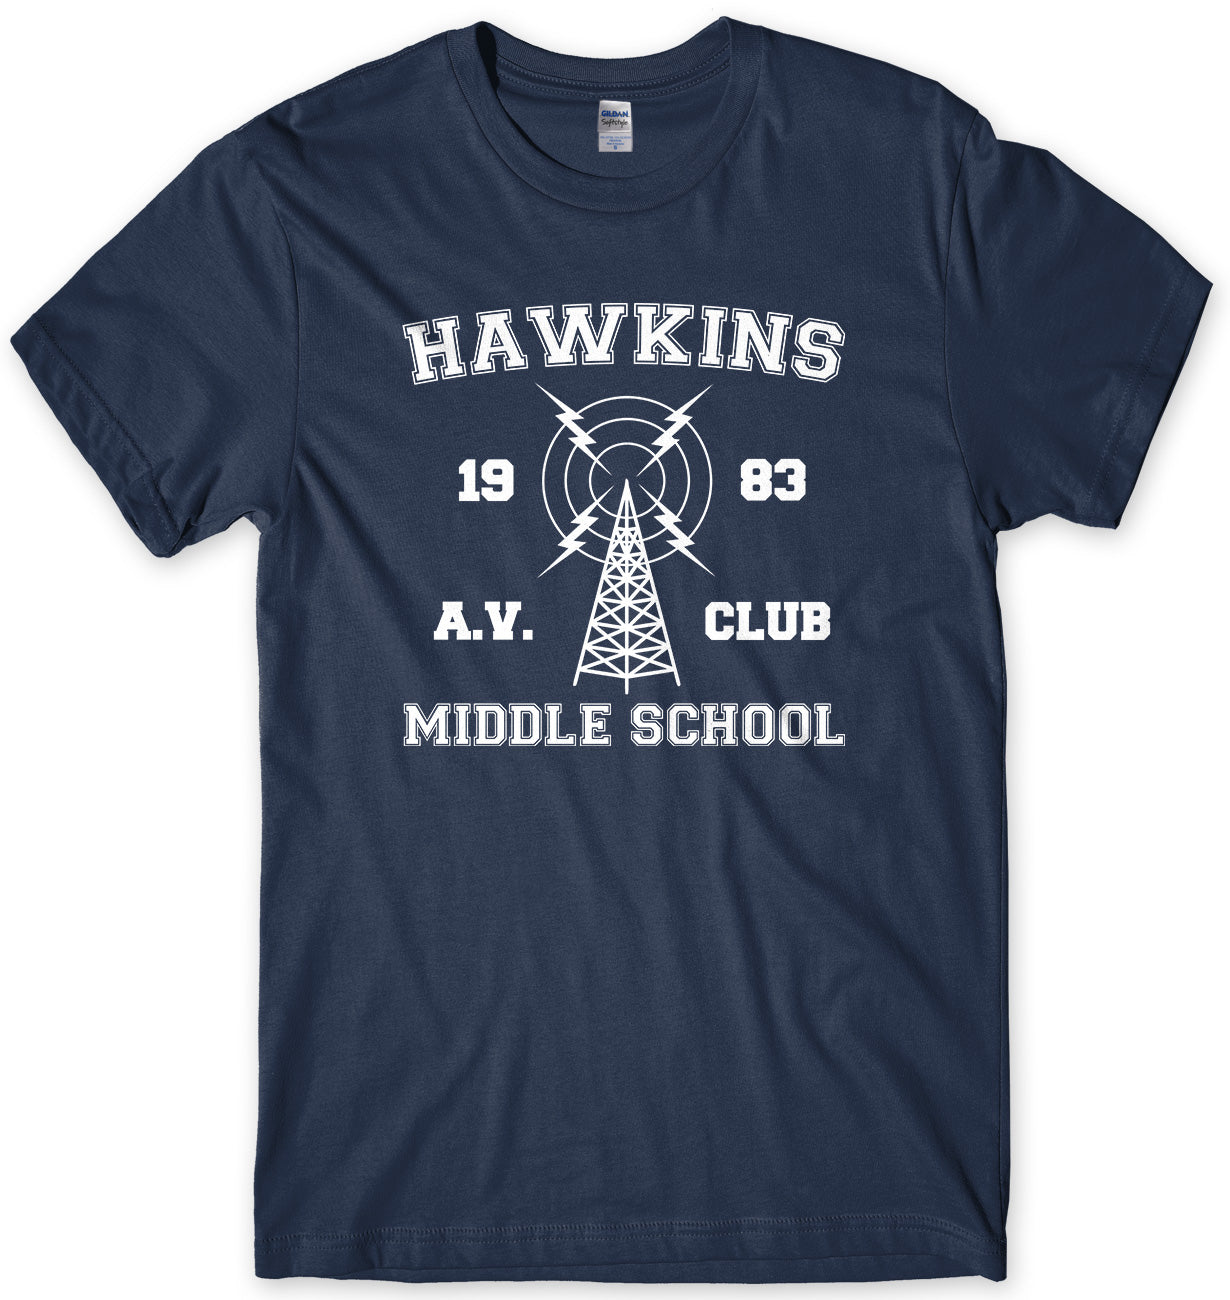 HAWKINS MIDDLE SCHOOL - INSPIRED BY STRANGER THINGS MENS UNISEX T-SHIRT